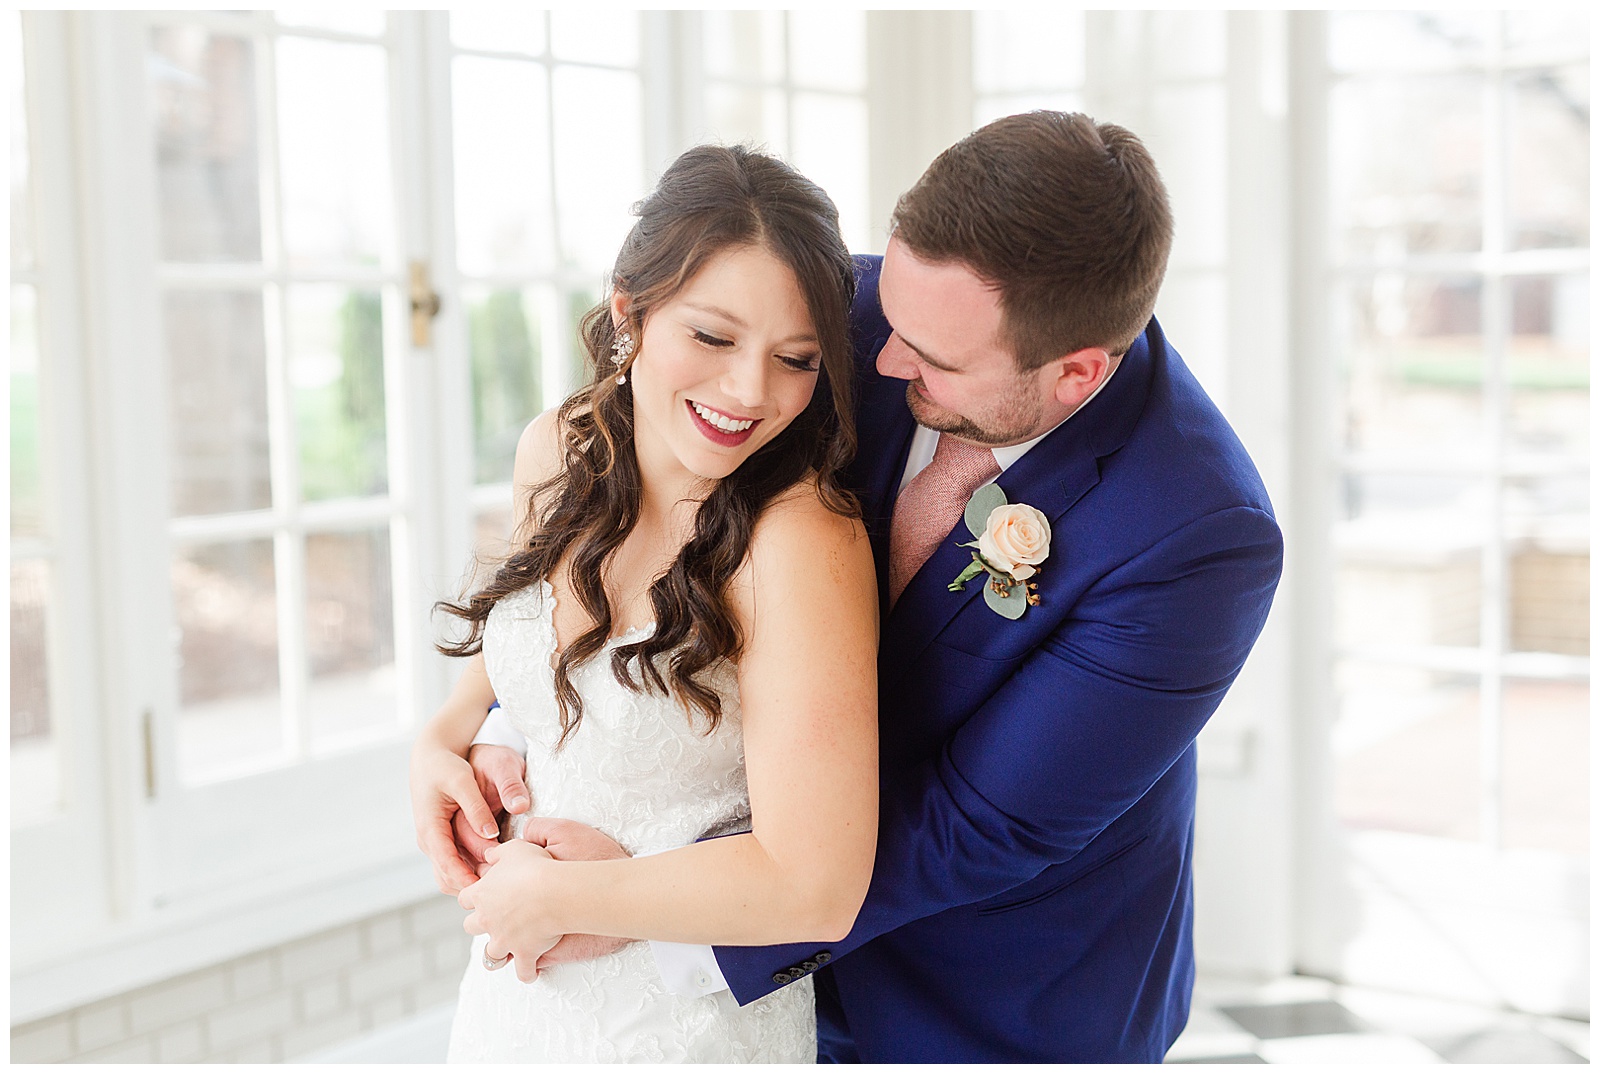 Adorable Indoor Bride Groom Portraits from Light and Airy Outdoor Wedding at Separk Mansion in Gastonia, NC | Kevyn Dixon Photography